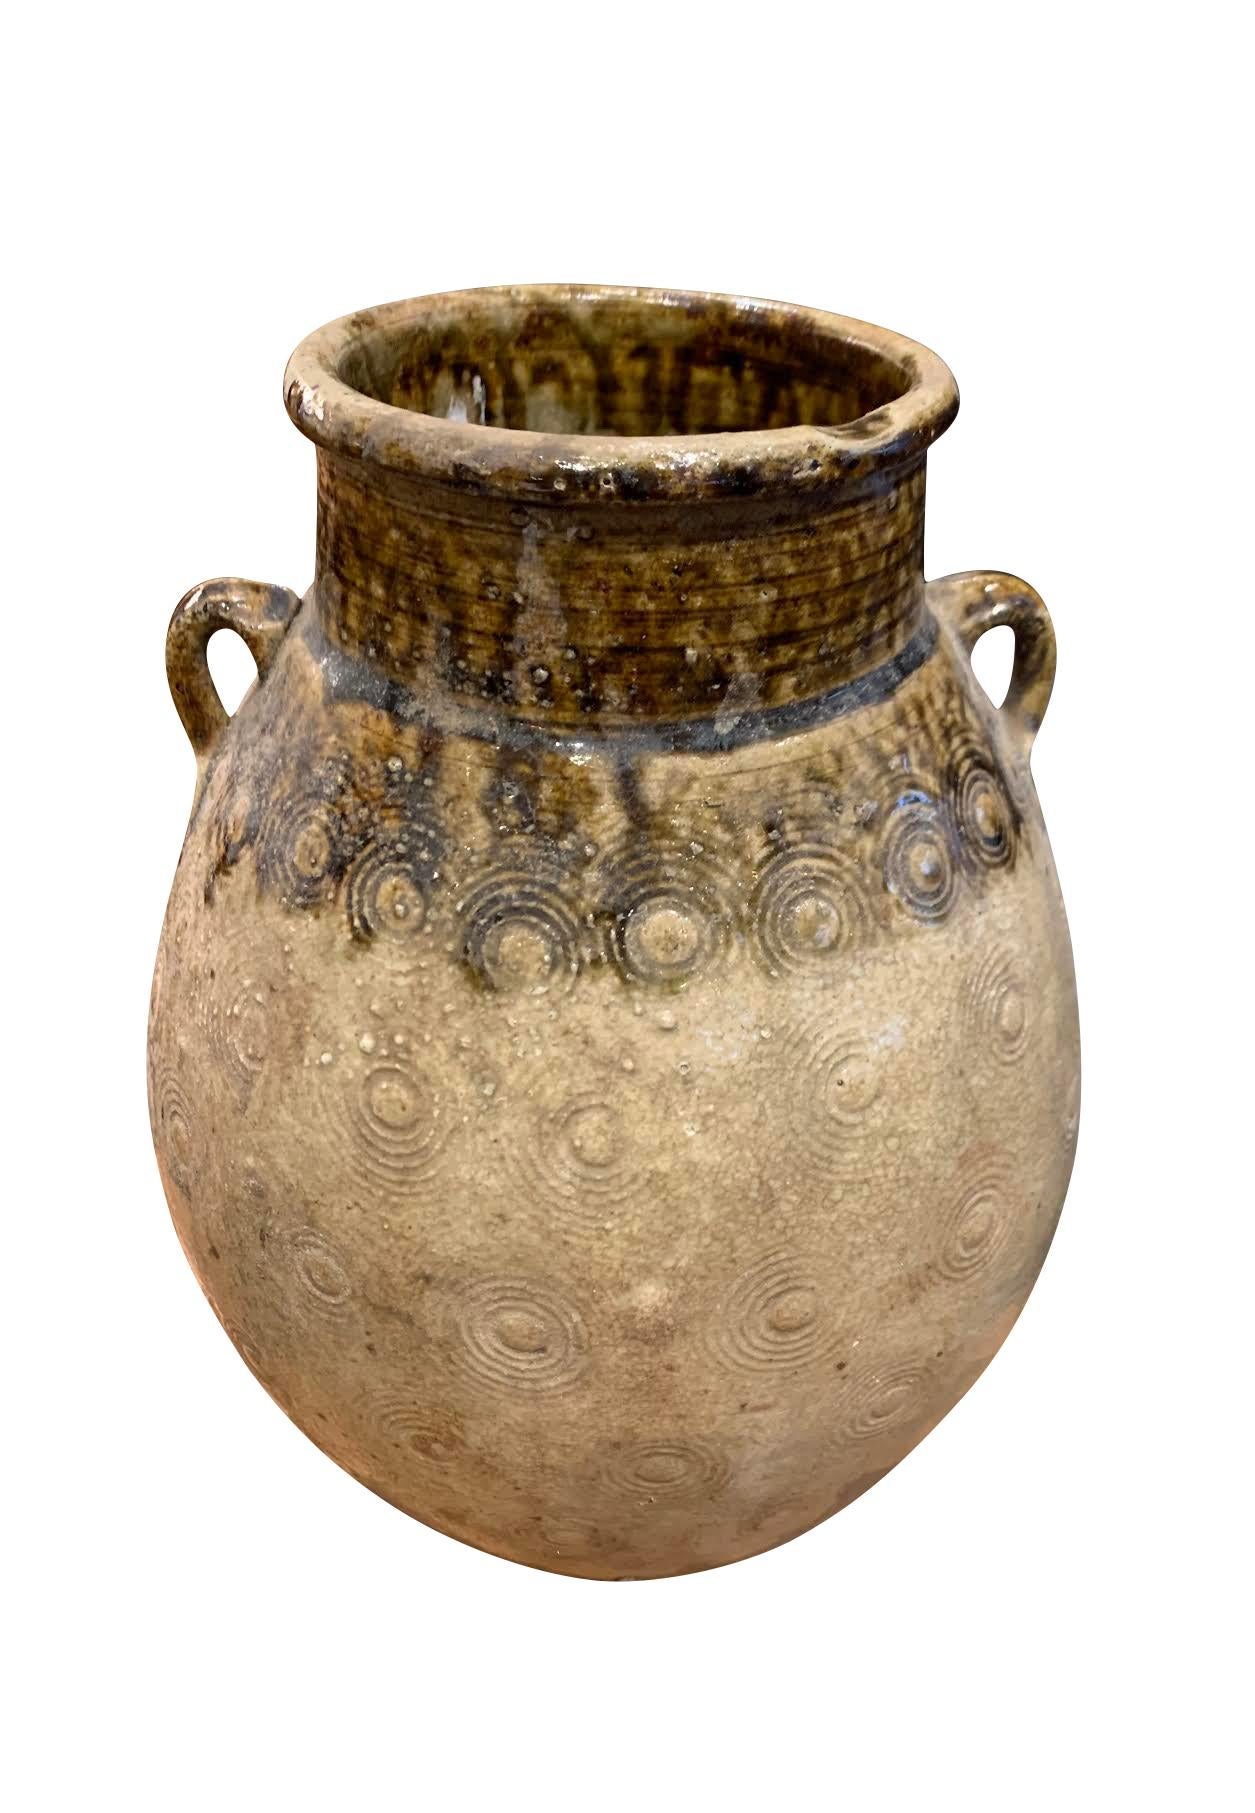 Brown Patterned Ceramic Vase, China, 19th Century For Sale 4